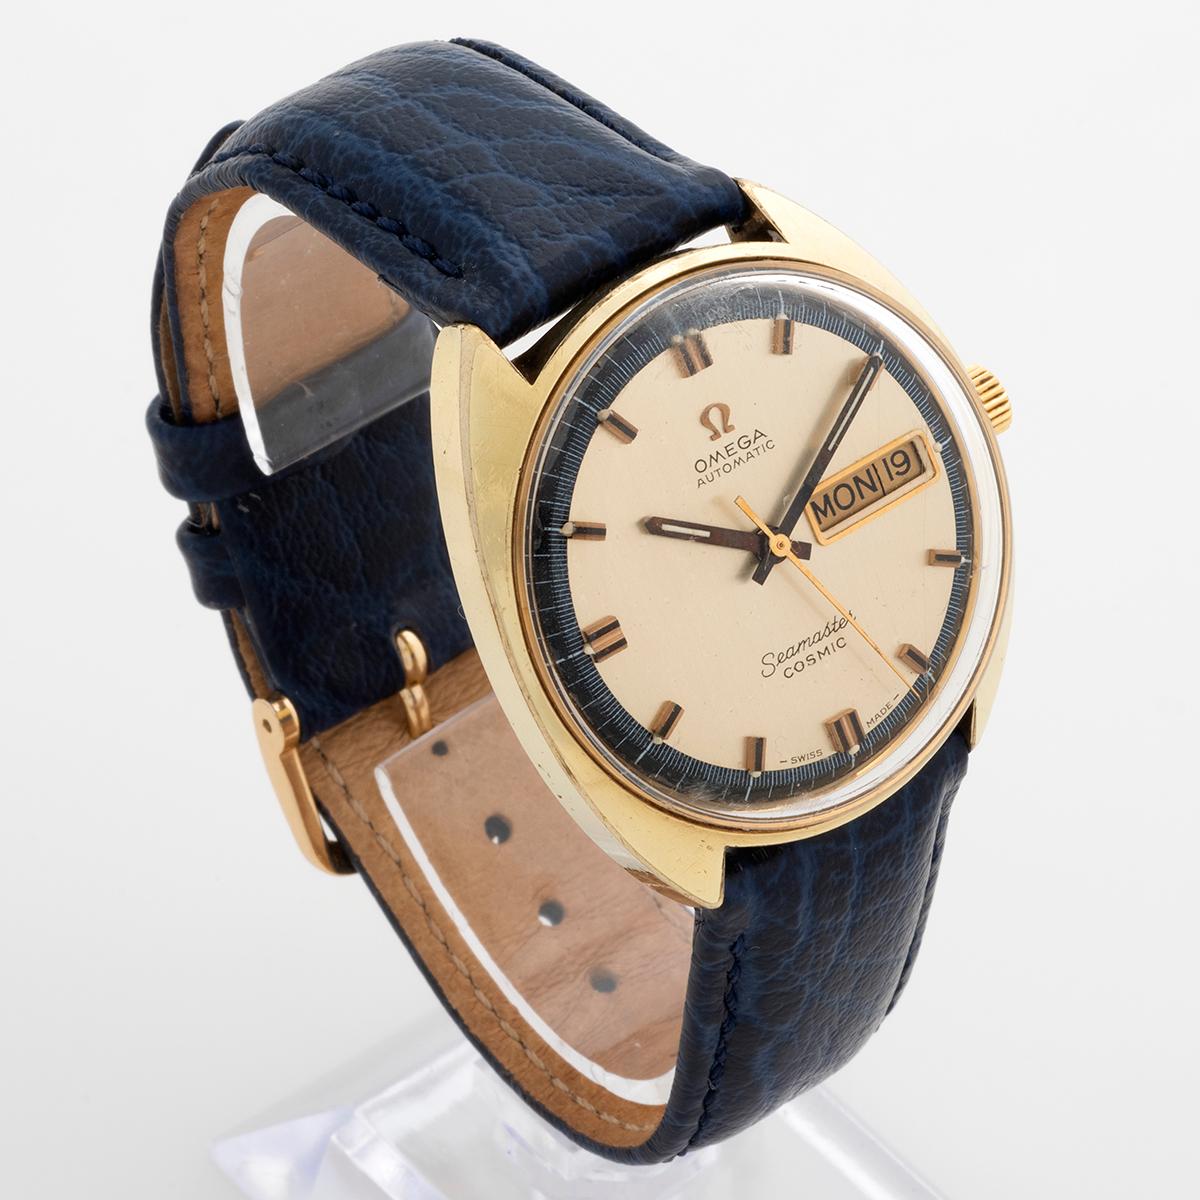 Our vintage Omega Seamaster Cosmic automatic reference 166.036 features a gold capped 35mm case with desirable champagne dial with blue inner bezel. There are some signs of use to the case and light patination to the original dial. A superb vintage